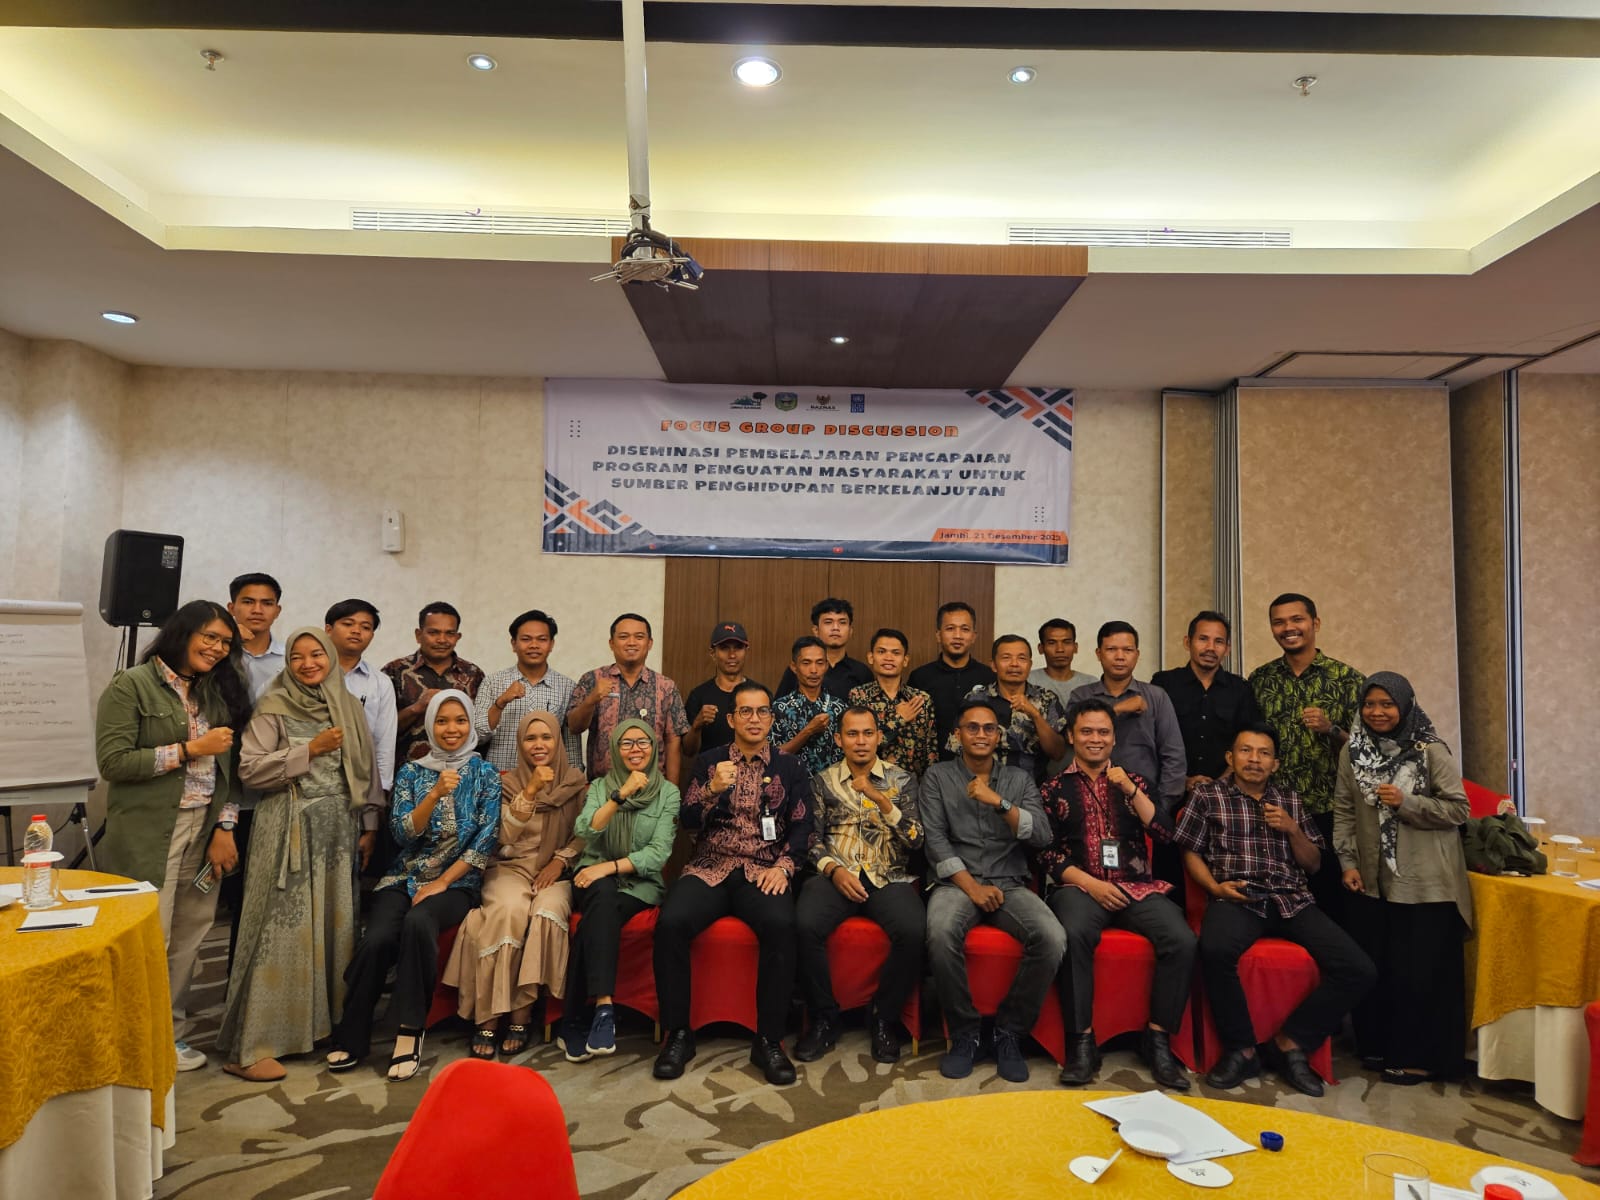 UNDP Indonesia-BAZNAS holds a discussion